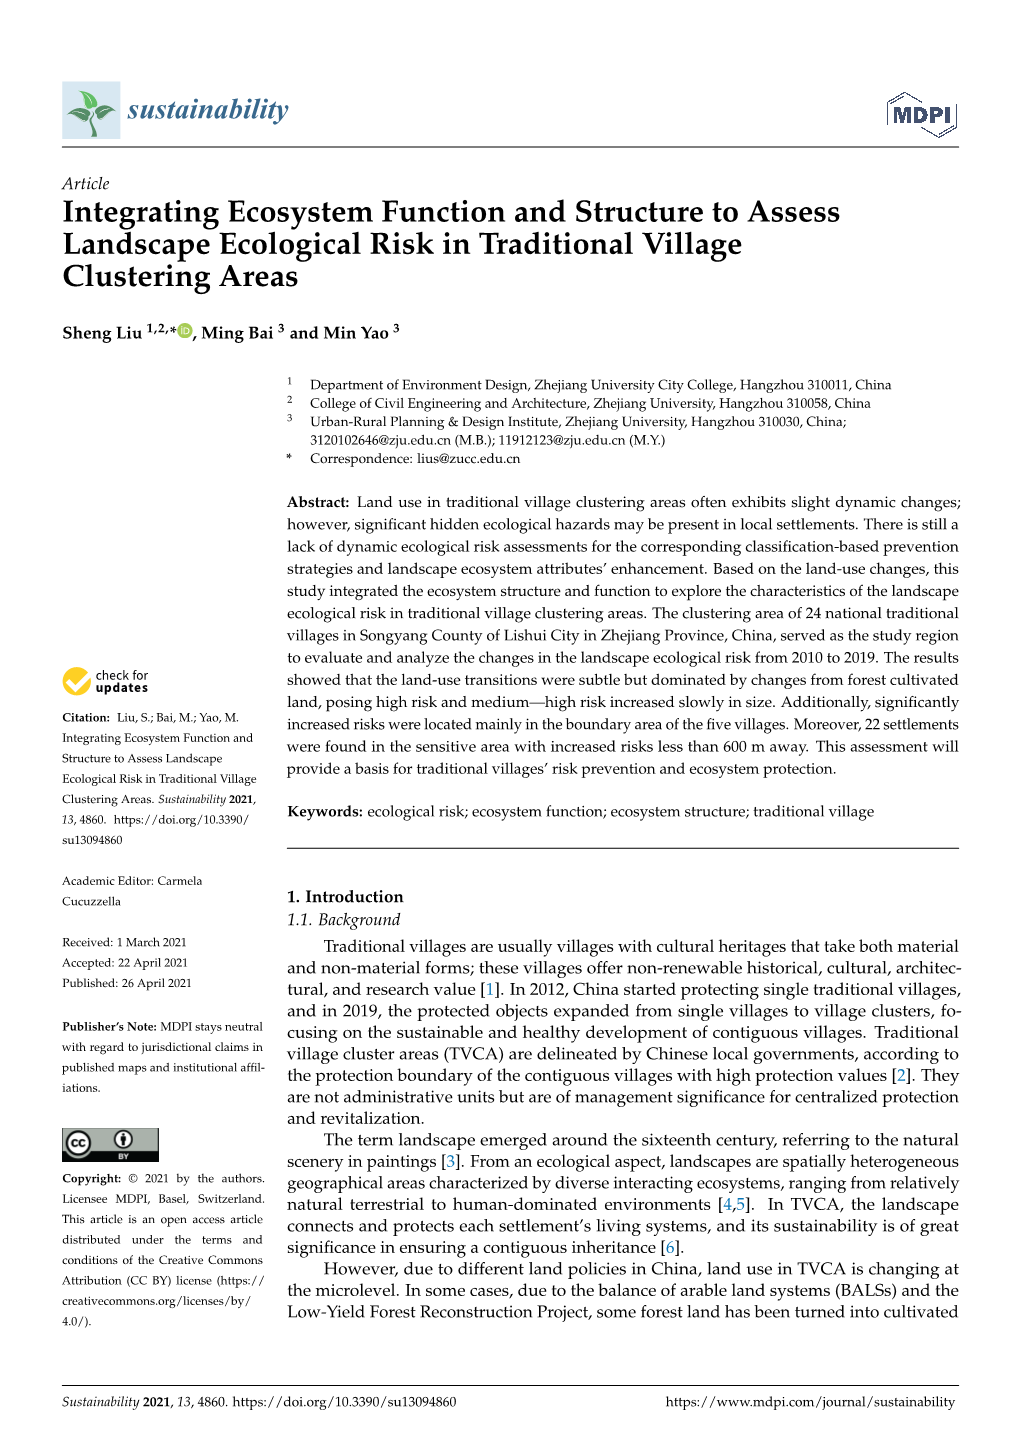 Integrating Ecosystem Function and Structure to Assess Landscape Ecological Risk in Traditional Village Clustering Areas